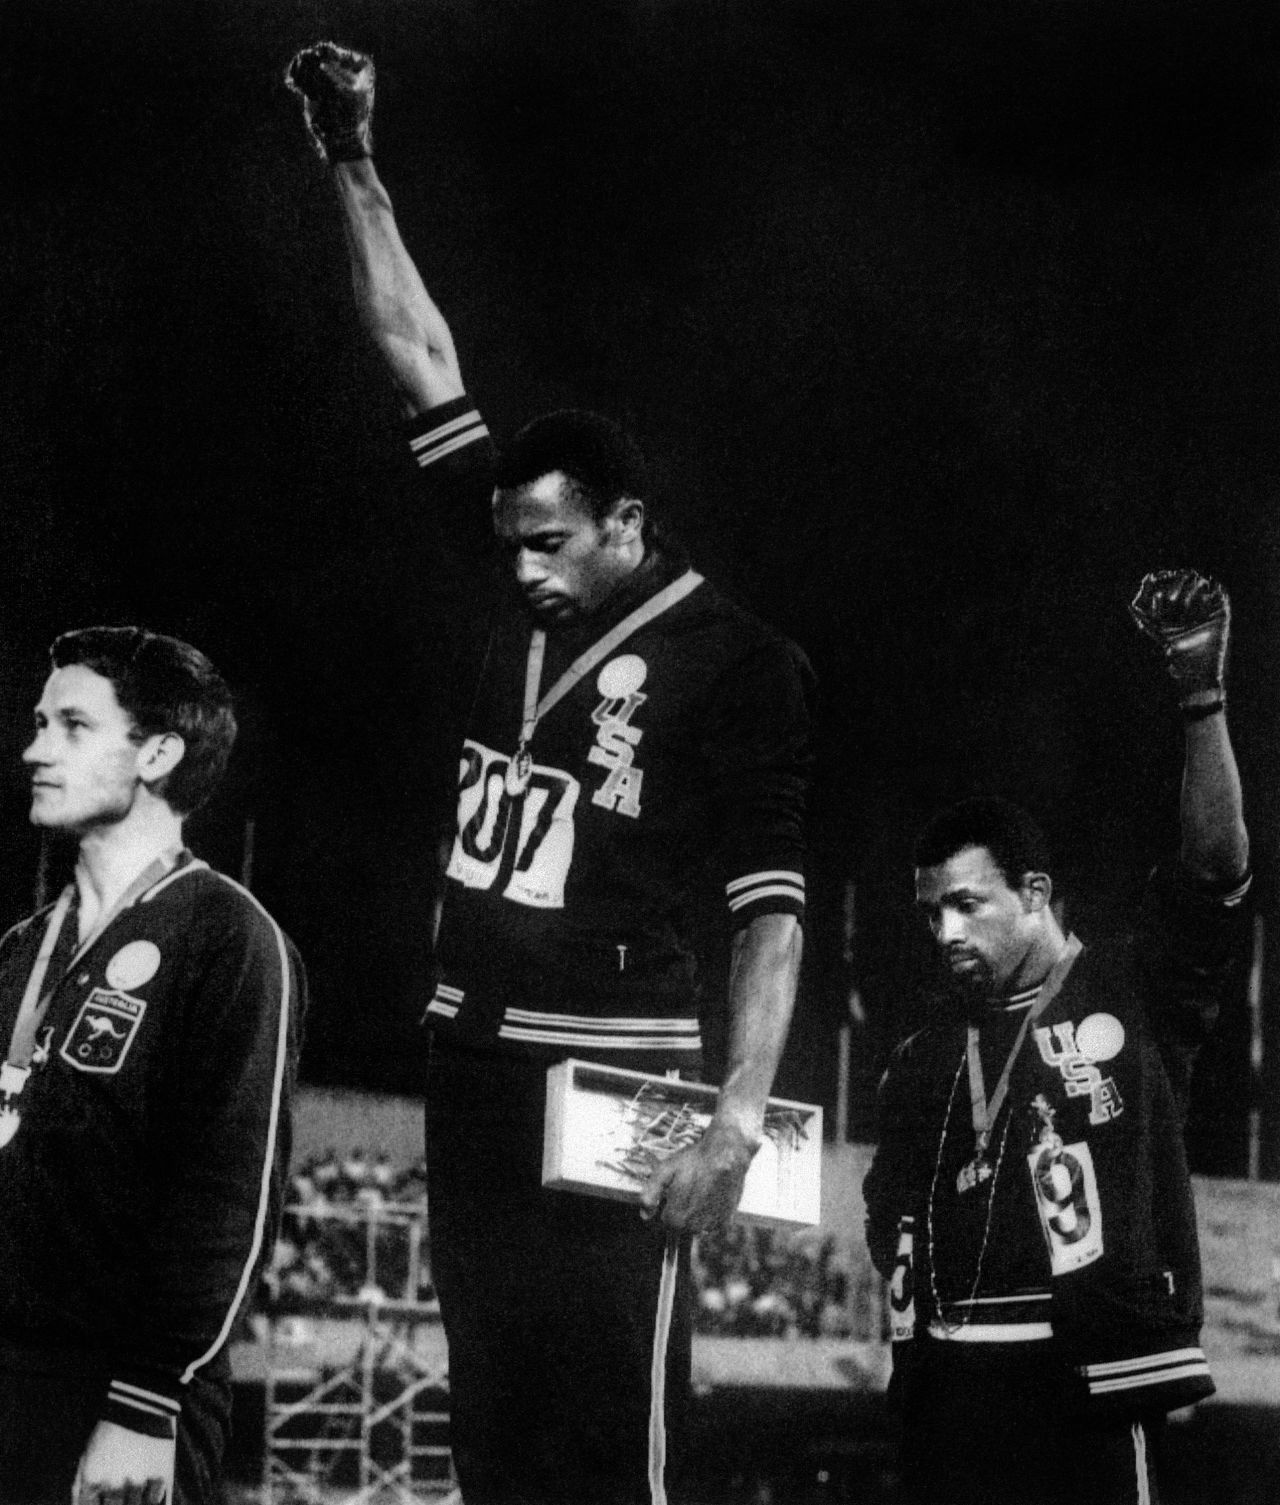 One of the decade's most iconic images was of U.S. sprinters Tommie Smith and John Carlos making their gloved Black Power salutes at the 1968 Mexico Olympics, to highlight the issue of segregation.